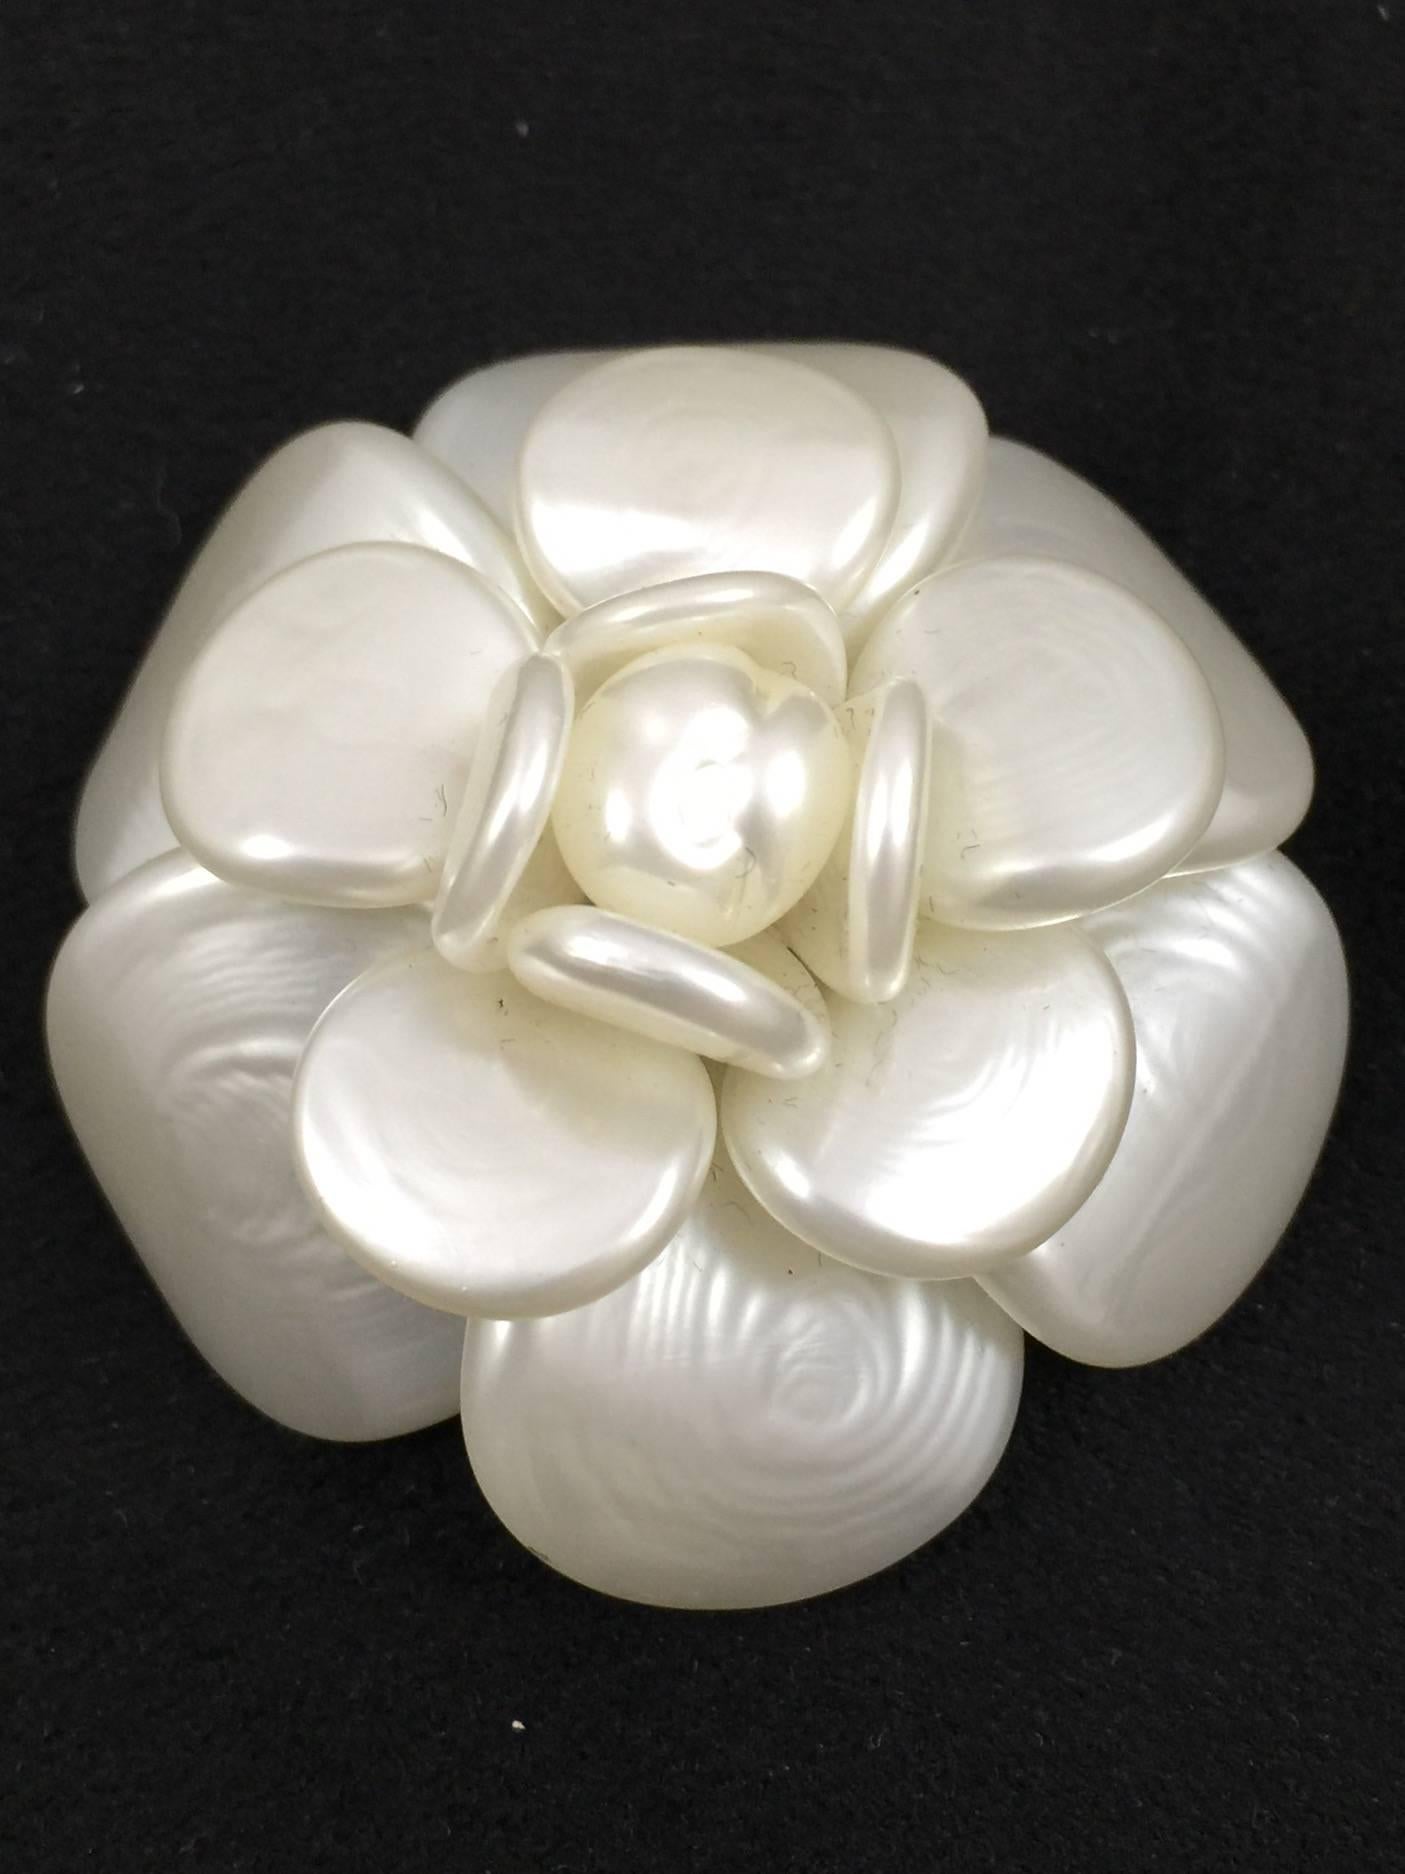 Mother of Pearl Camellia Pin is a signature Chanel accessory and a must for any connoisseur of all things Coco!  Instantly lends sophistication and timeless elegance to any jacket, sweater, or ensemble.  Properly hallmarked gold tone hardware.  Made